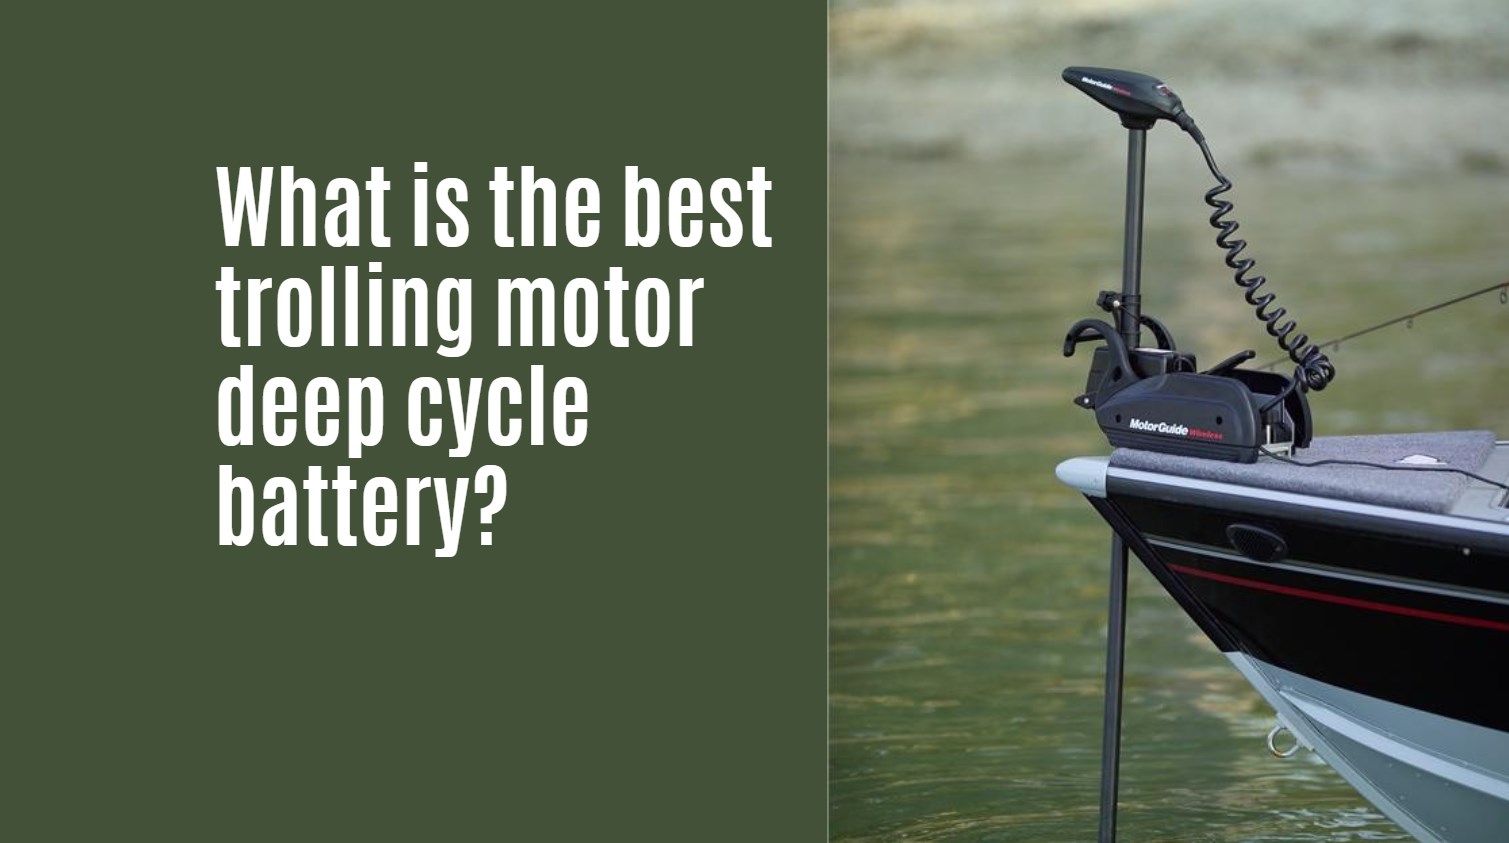 What is the best trolling motor deep cycle battery?